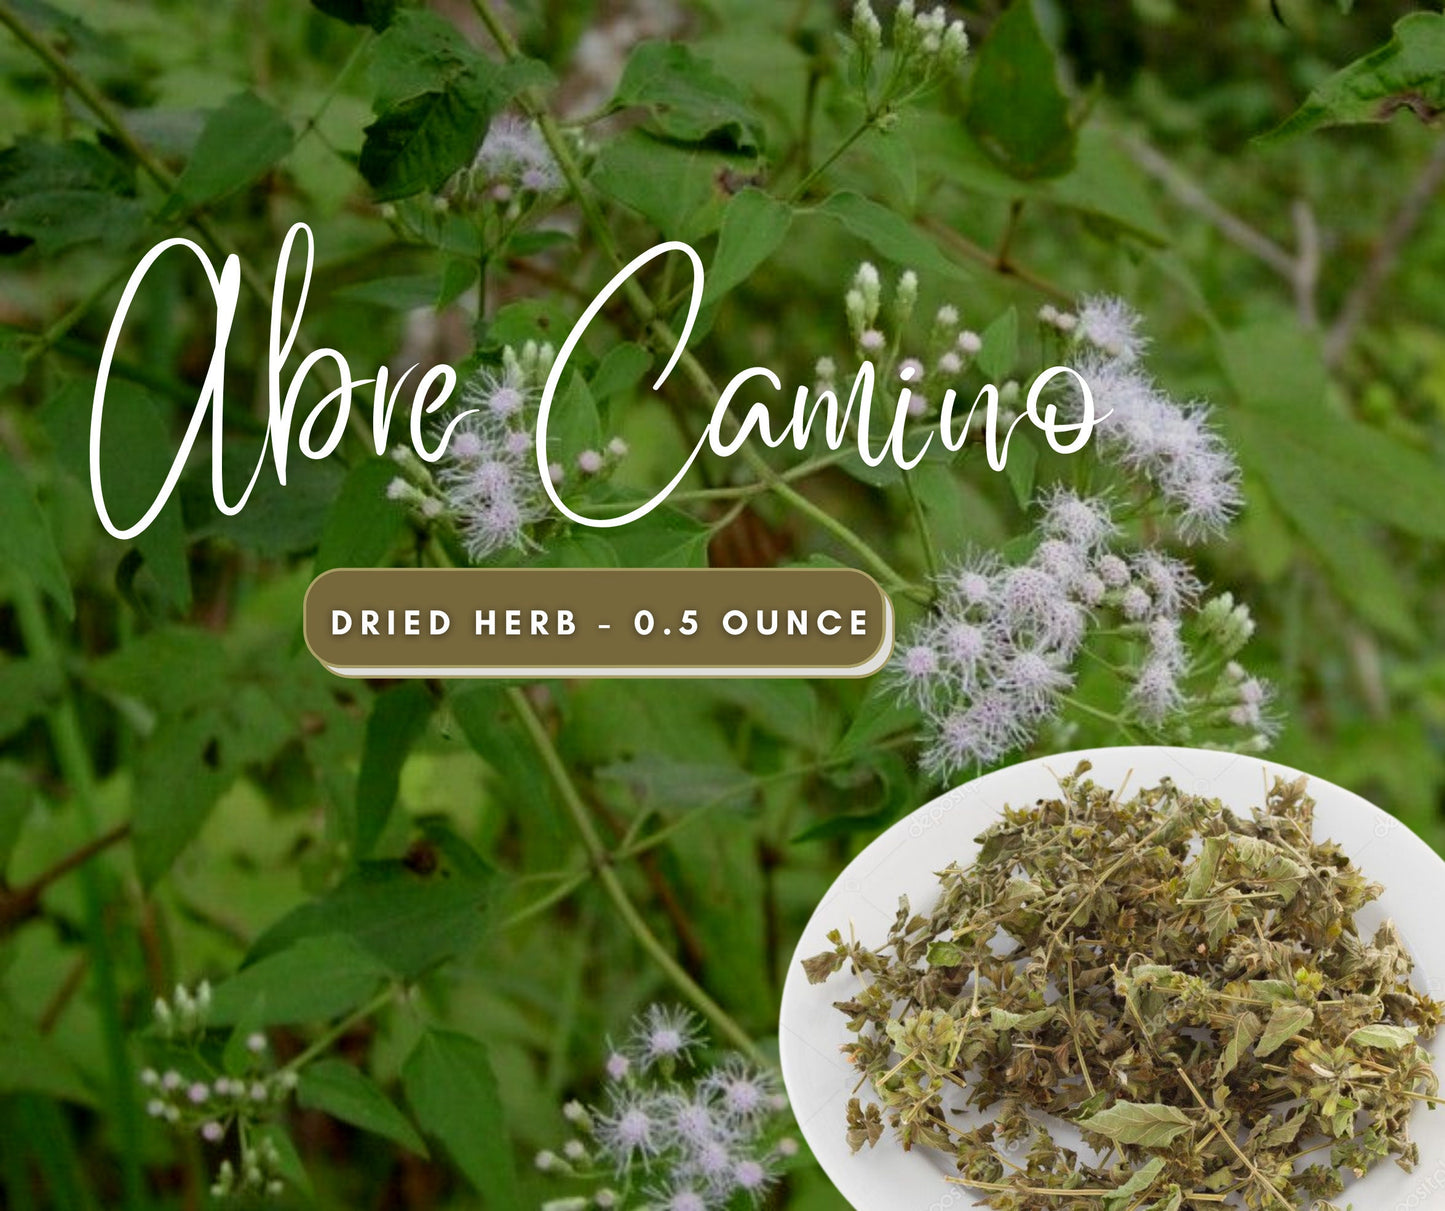 Abre Camino | Road Opener Dried Herb for Prosperity and Spiritual Cleansing use in Money Spells traditional Voodoo - Hoodoo - Santeria